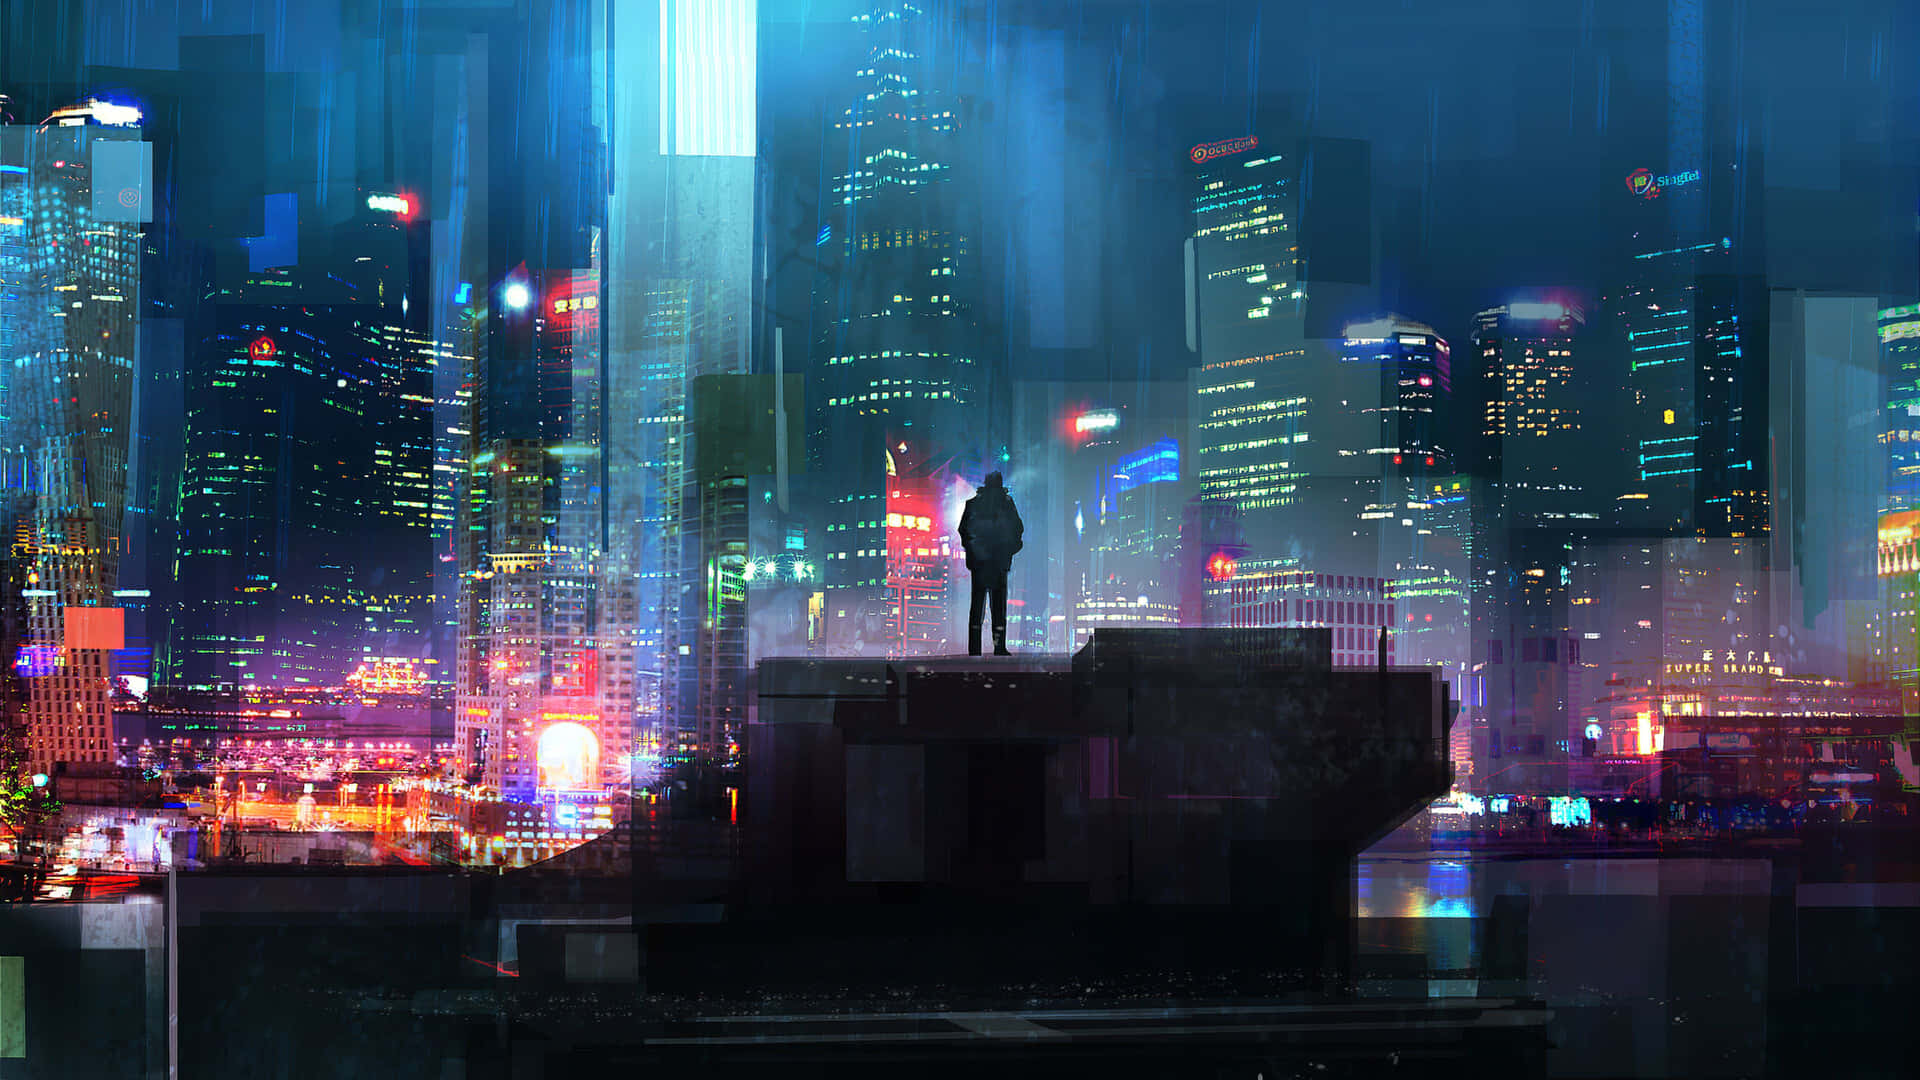 "See the city light up with electricity in a Cyberpunk Aesthetic" Wallpaper